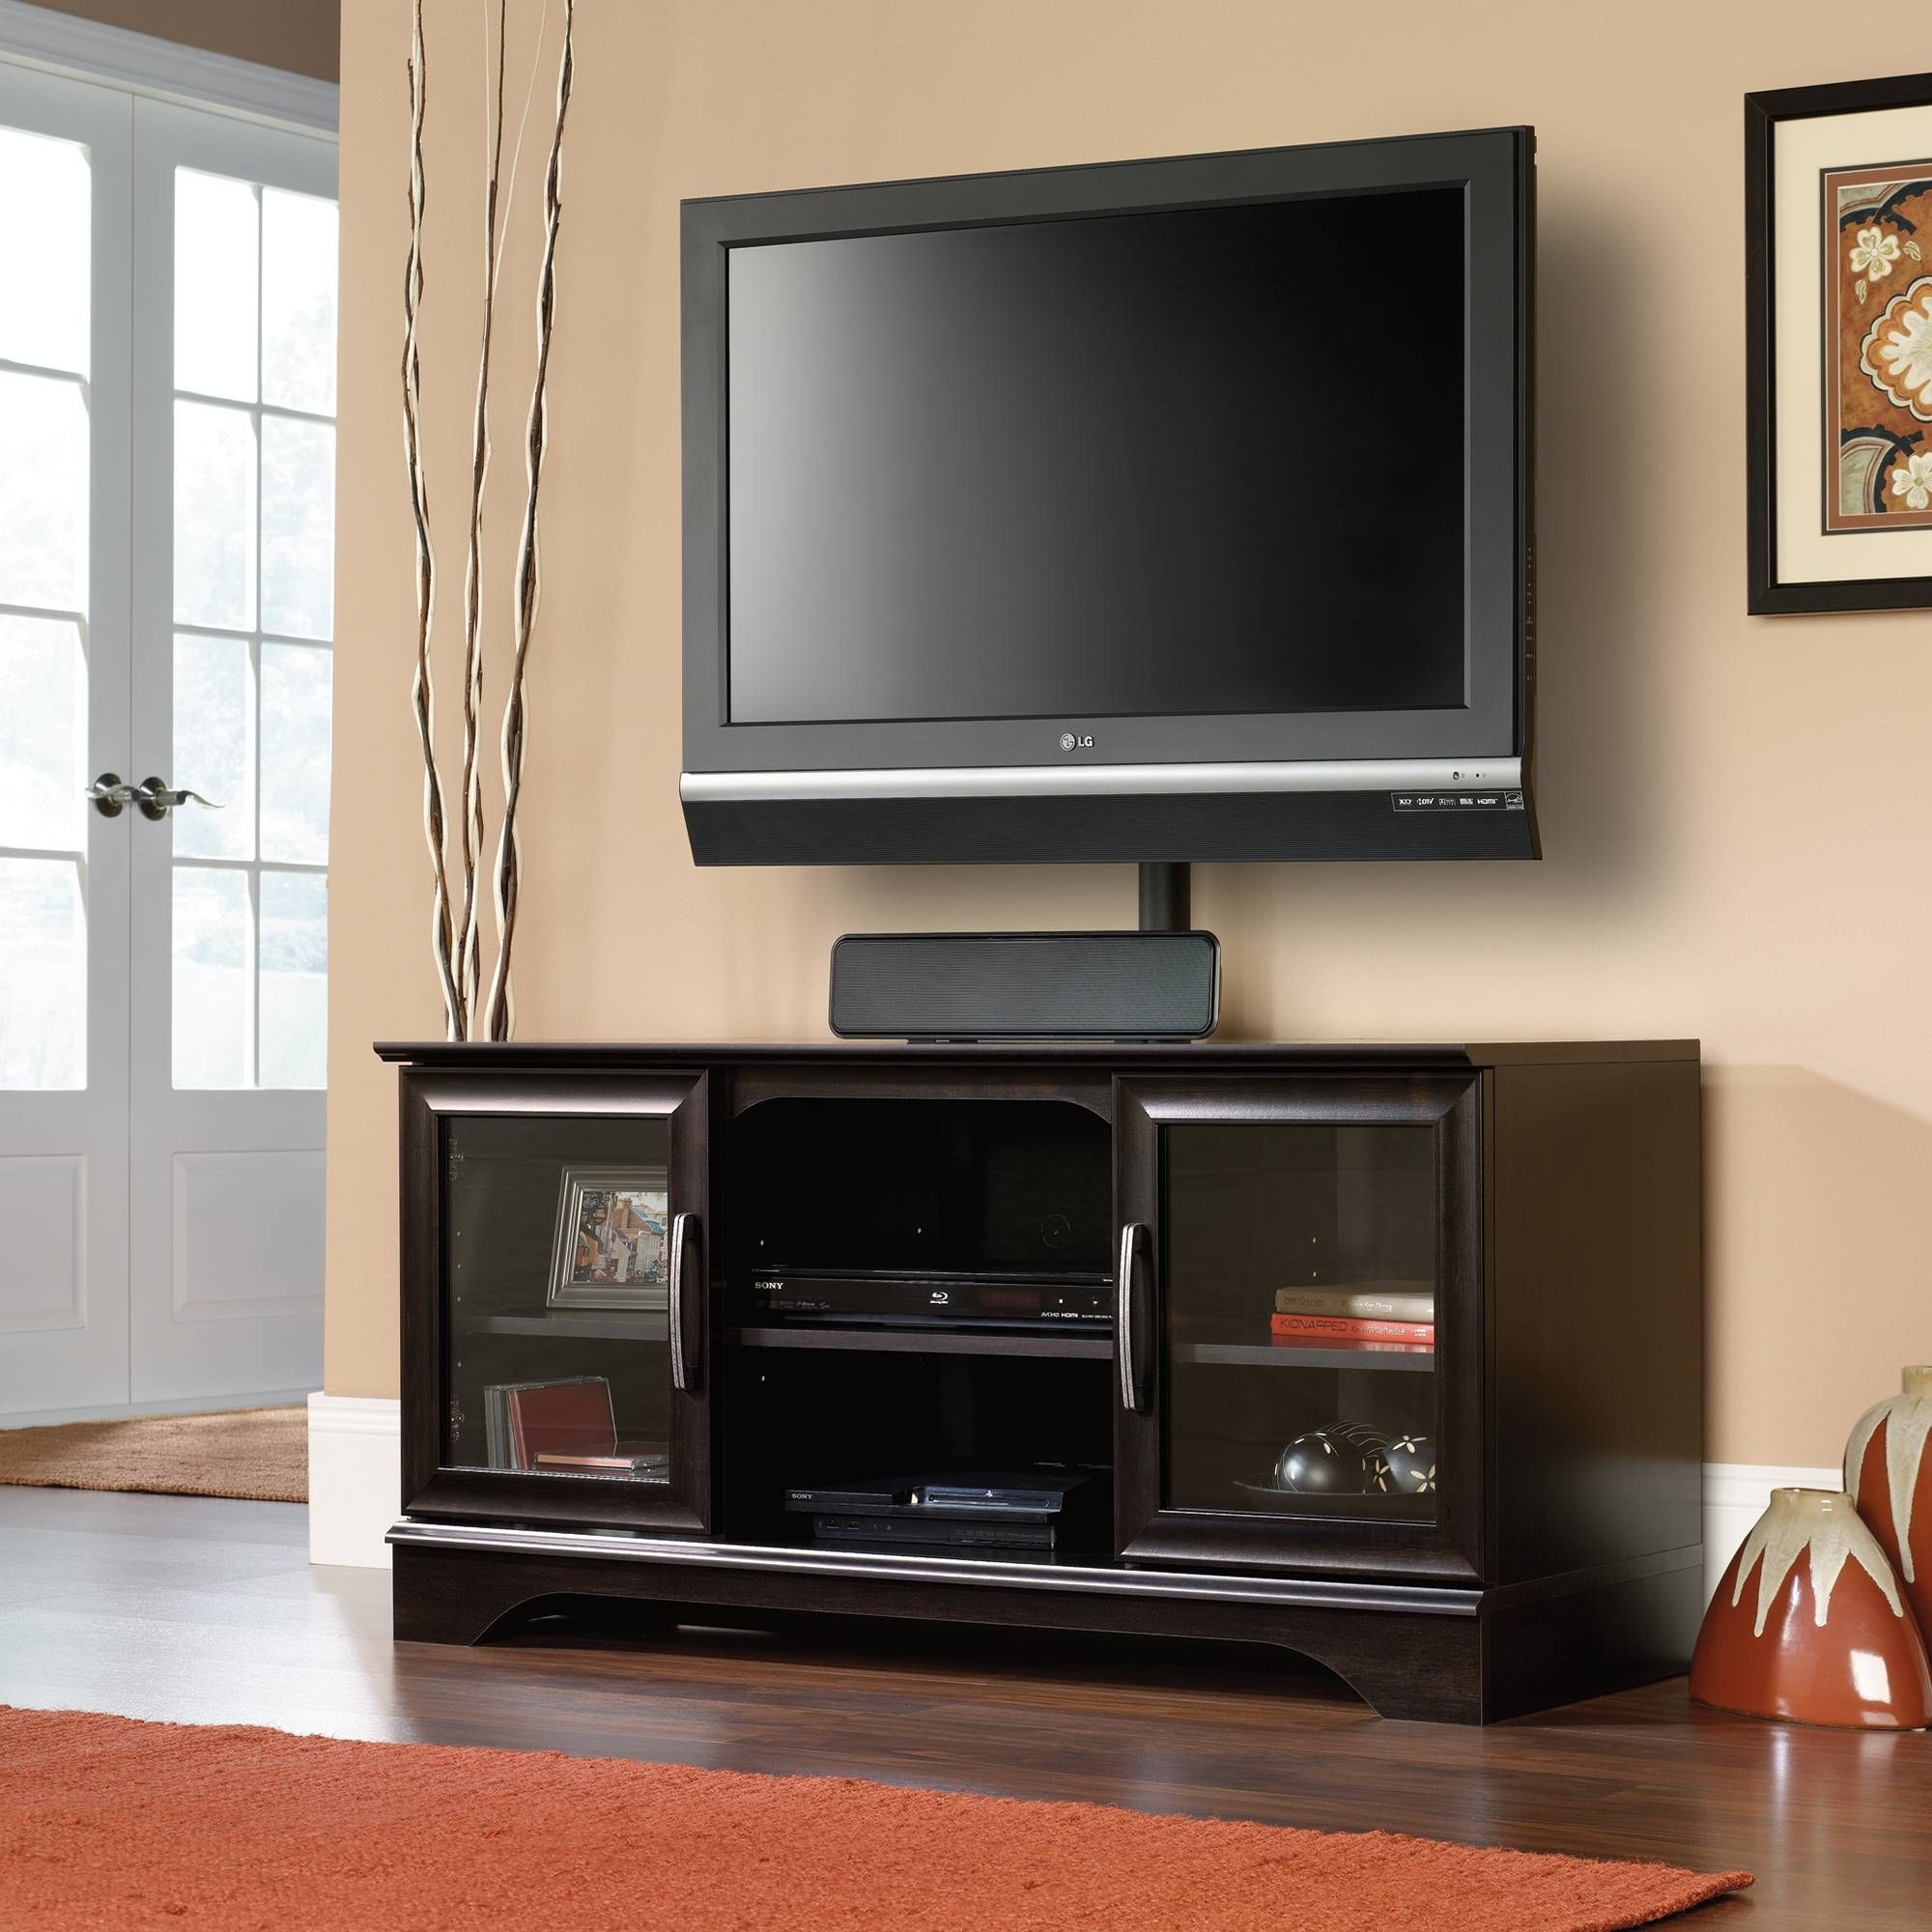 An Overview Of Black Tv Stand With Mount – Furniture Depot For Tv Stand With Mount (View 15 of 15)